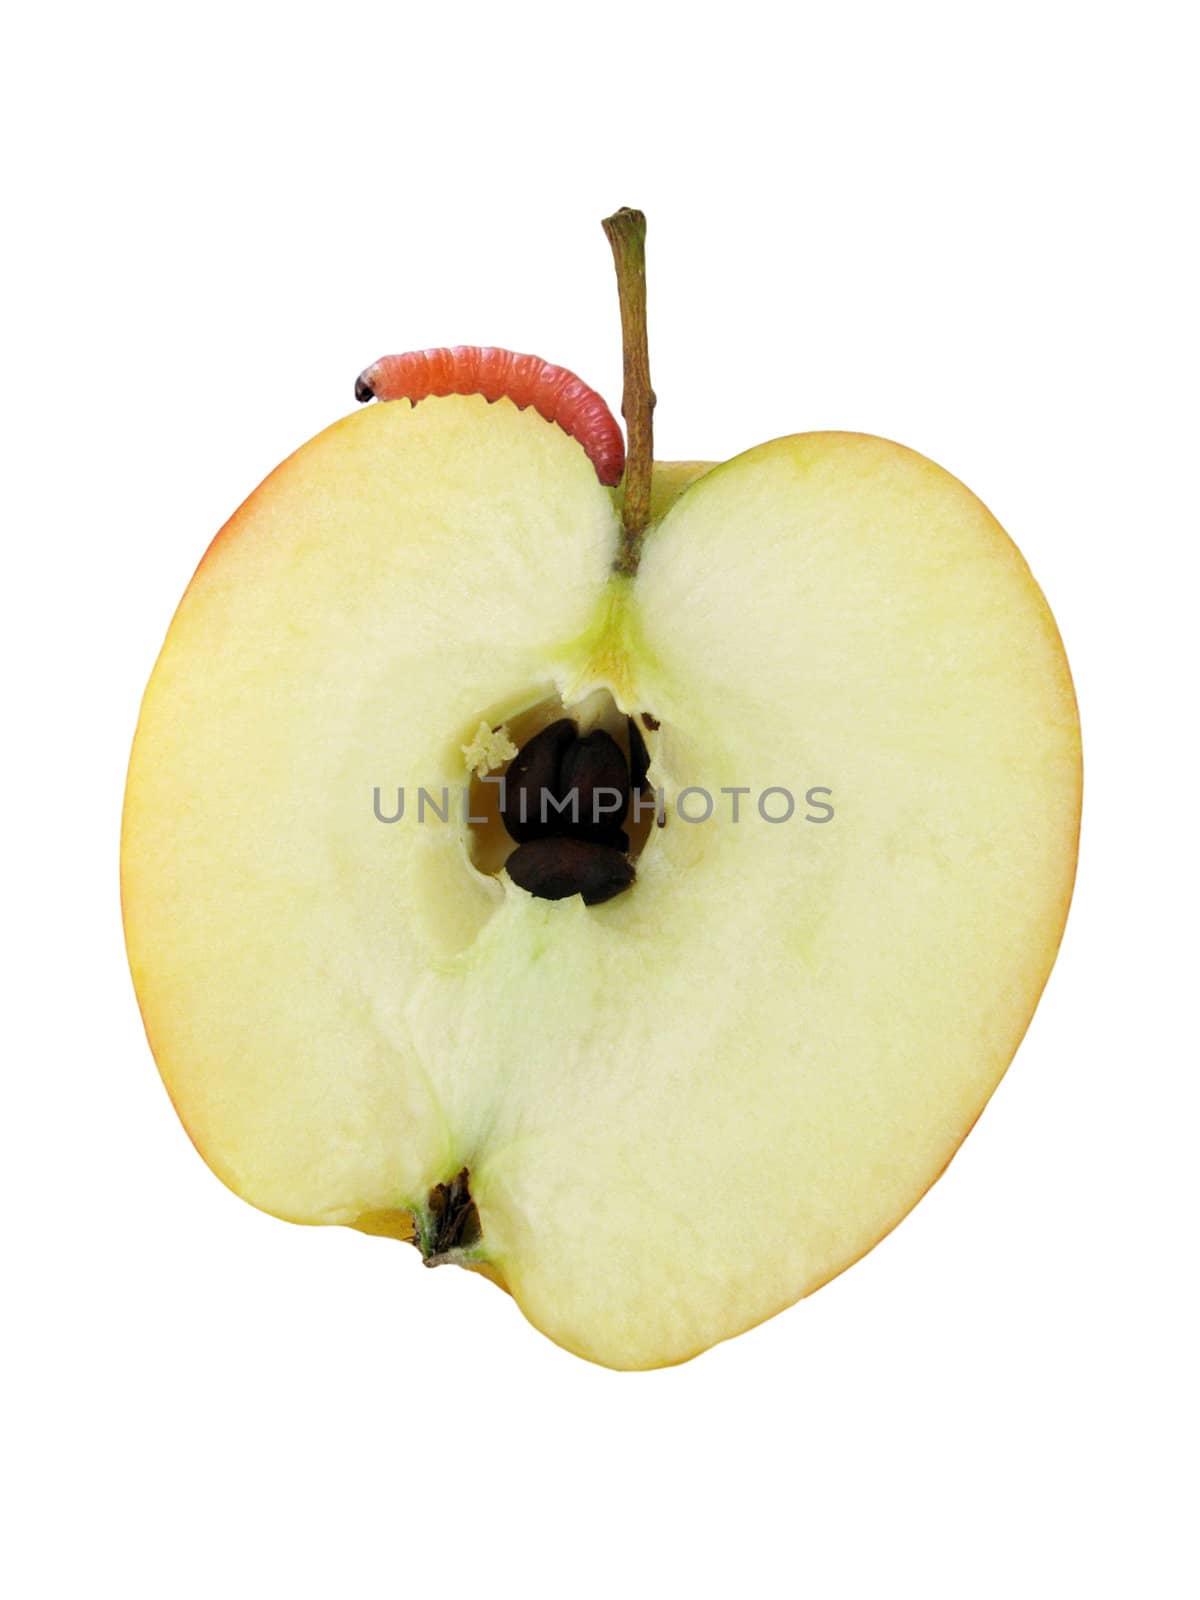 worm on half of apple over white